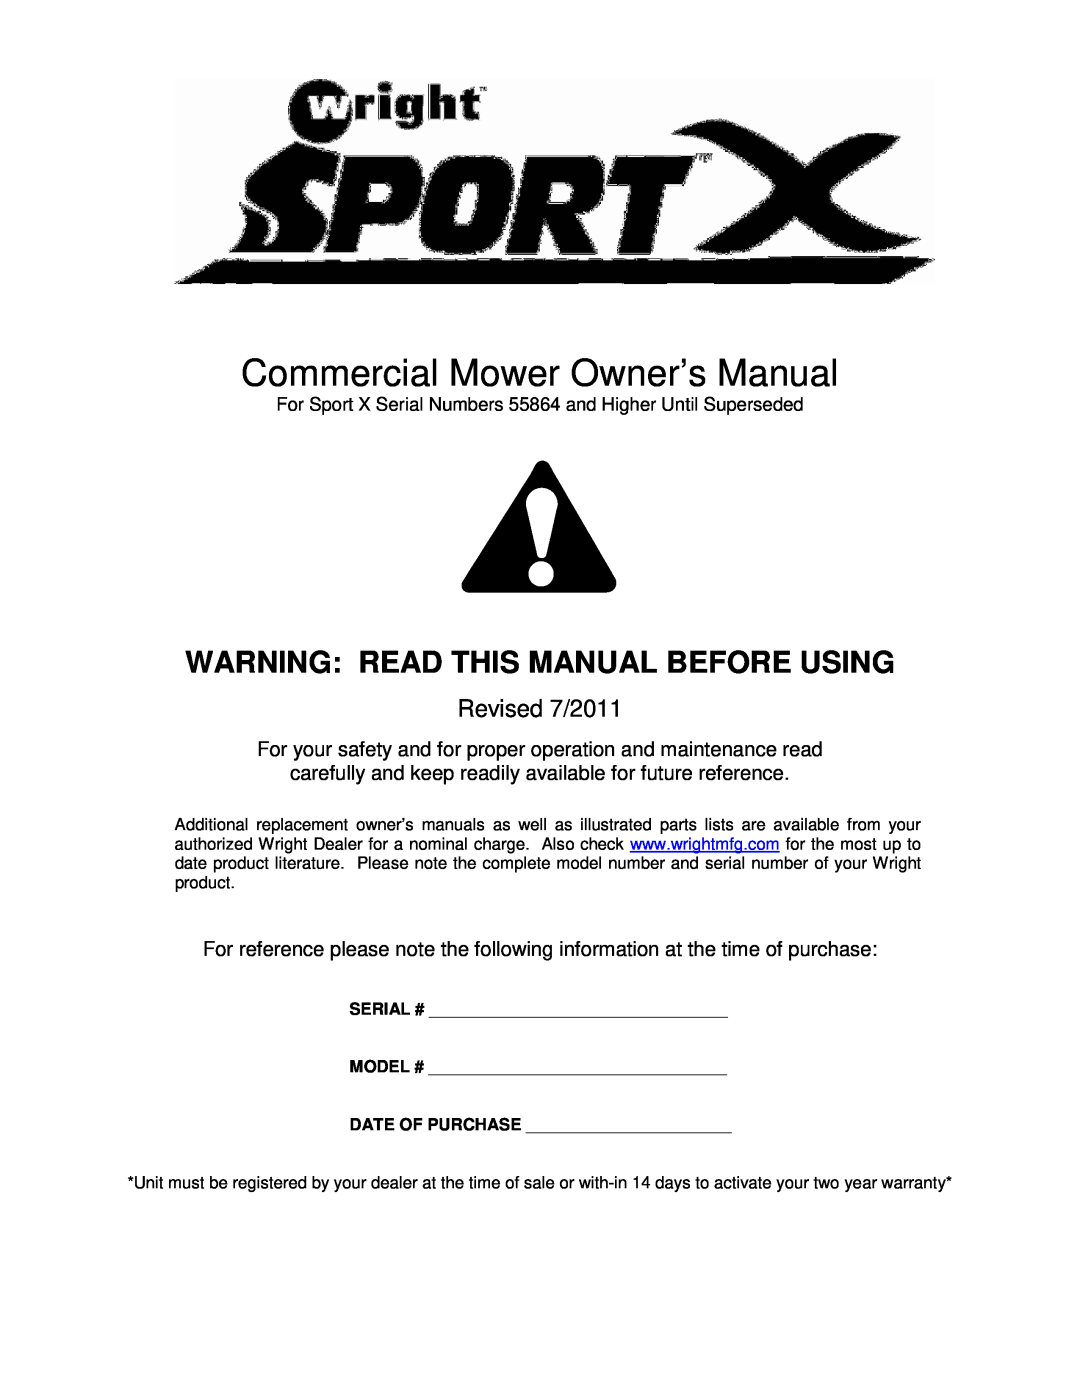 Wright Manufacturing 14SH654 owner manual Warning Read This Manual Before Using, Revised 7/2011 